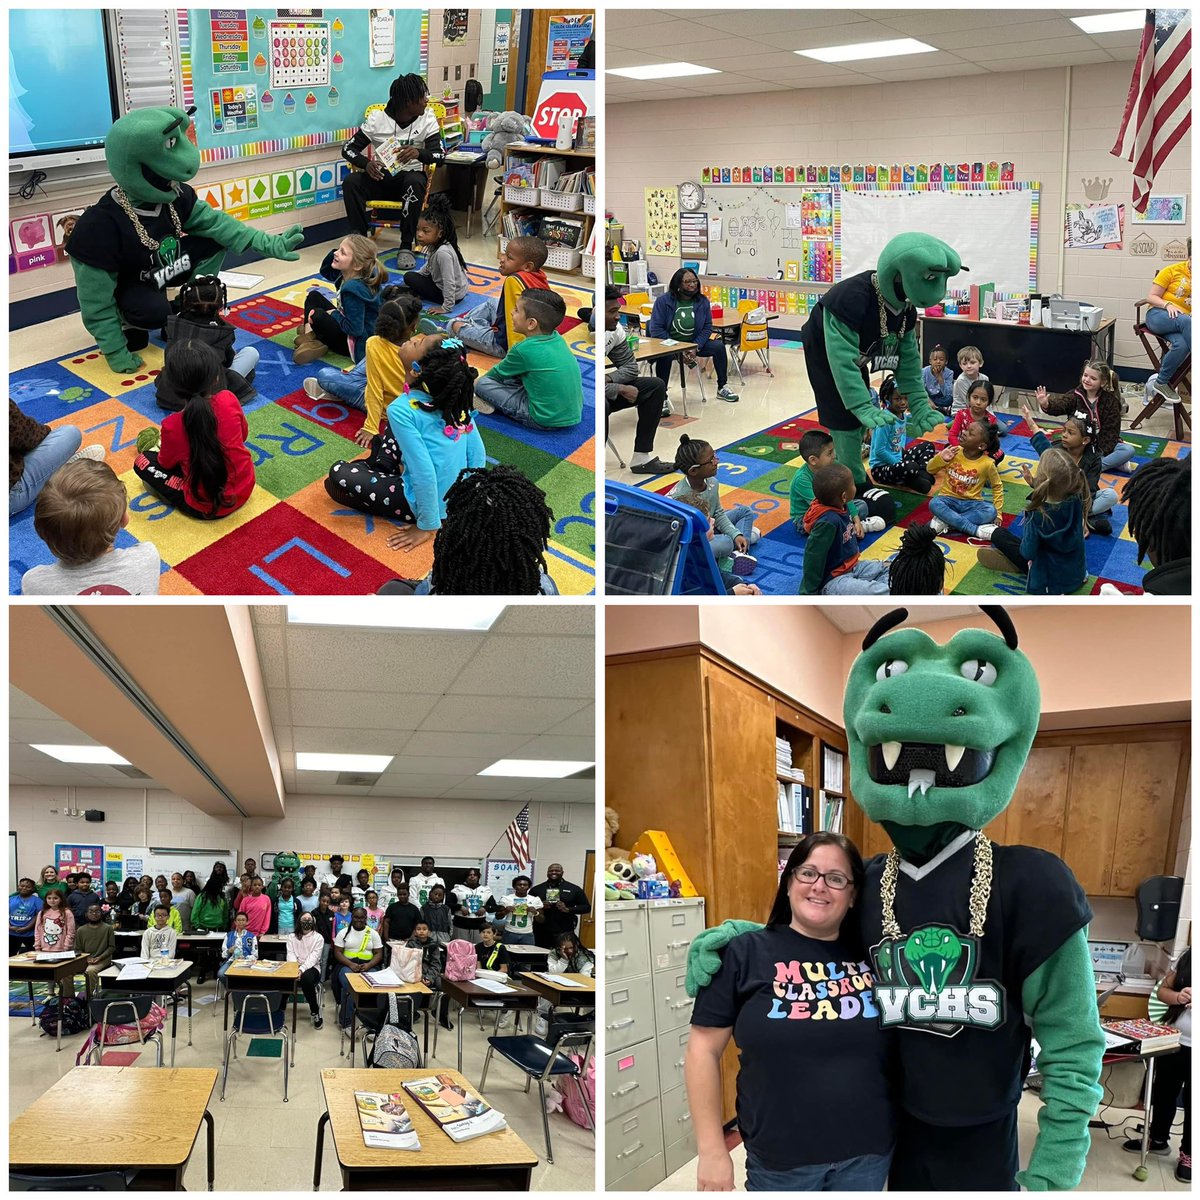 The Vipers visited the Eagle’s Nest today! Students were so excited to see the VCHS football team and to meet Venom, their mascot! Thank you for coming out today to not only meet and greet, but to read a story to some of our Eagles! 💛🦅💚